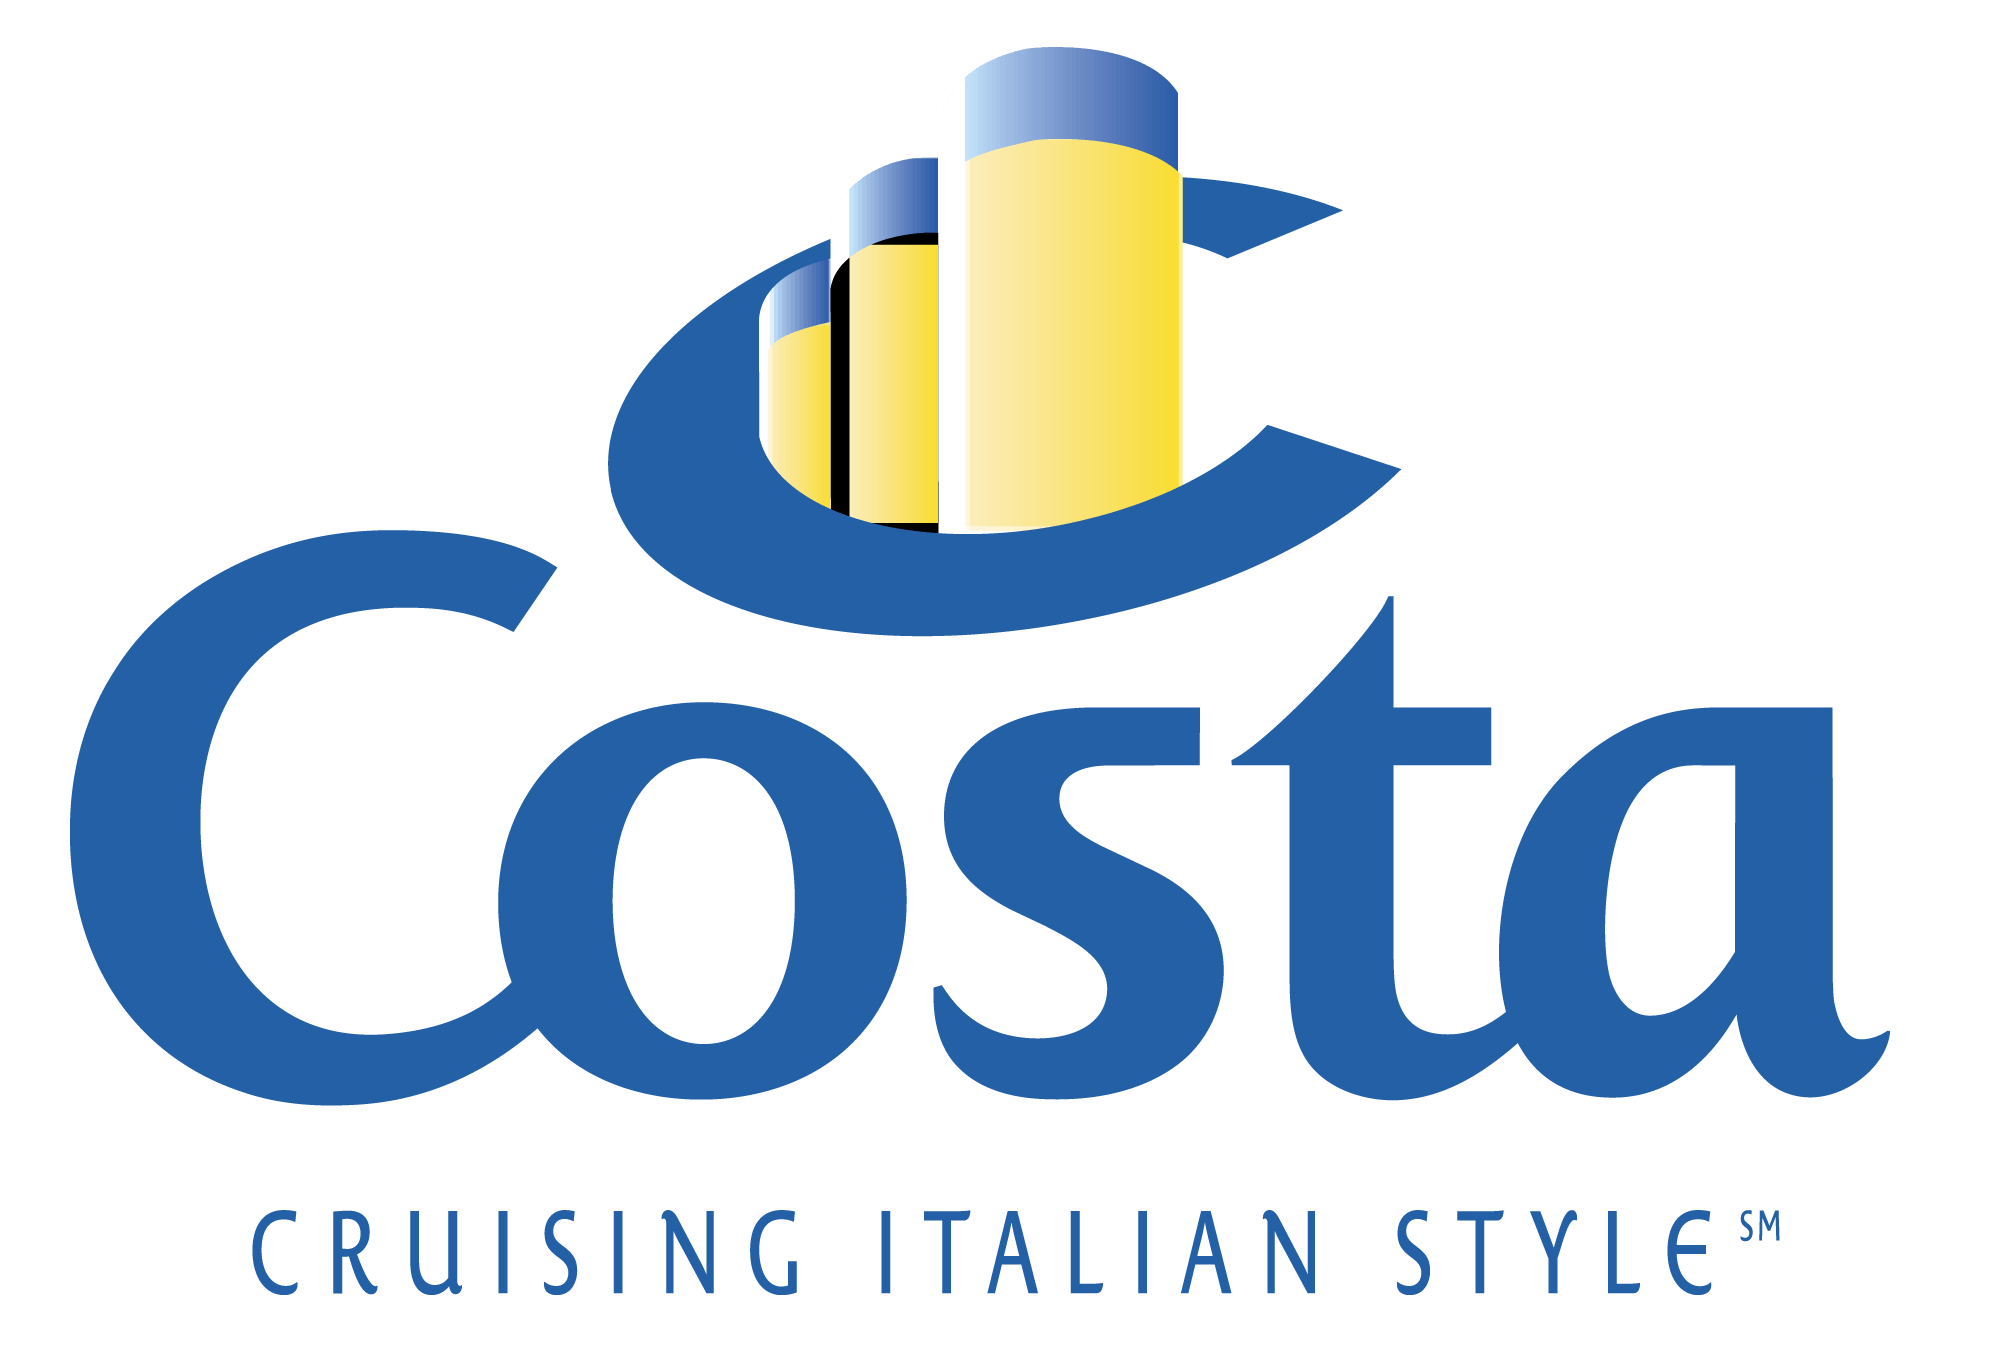 Crusie Logo - Meaning Costa logo and symbol. history and evolution